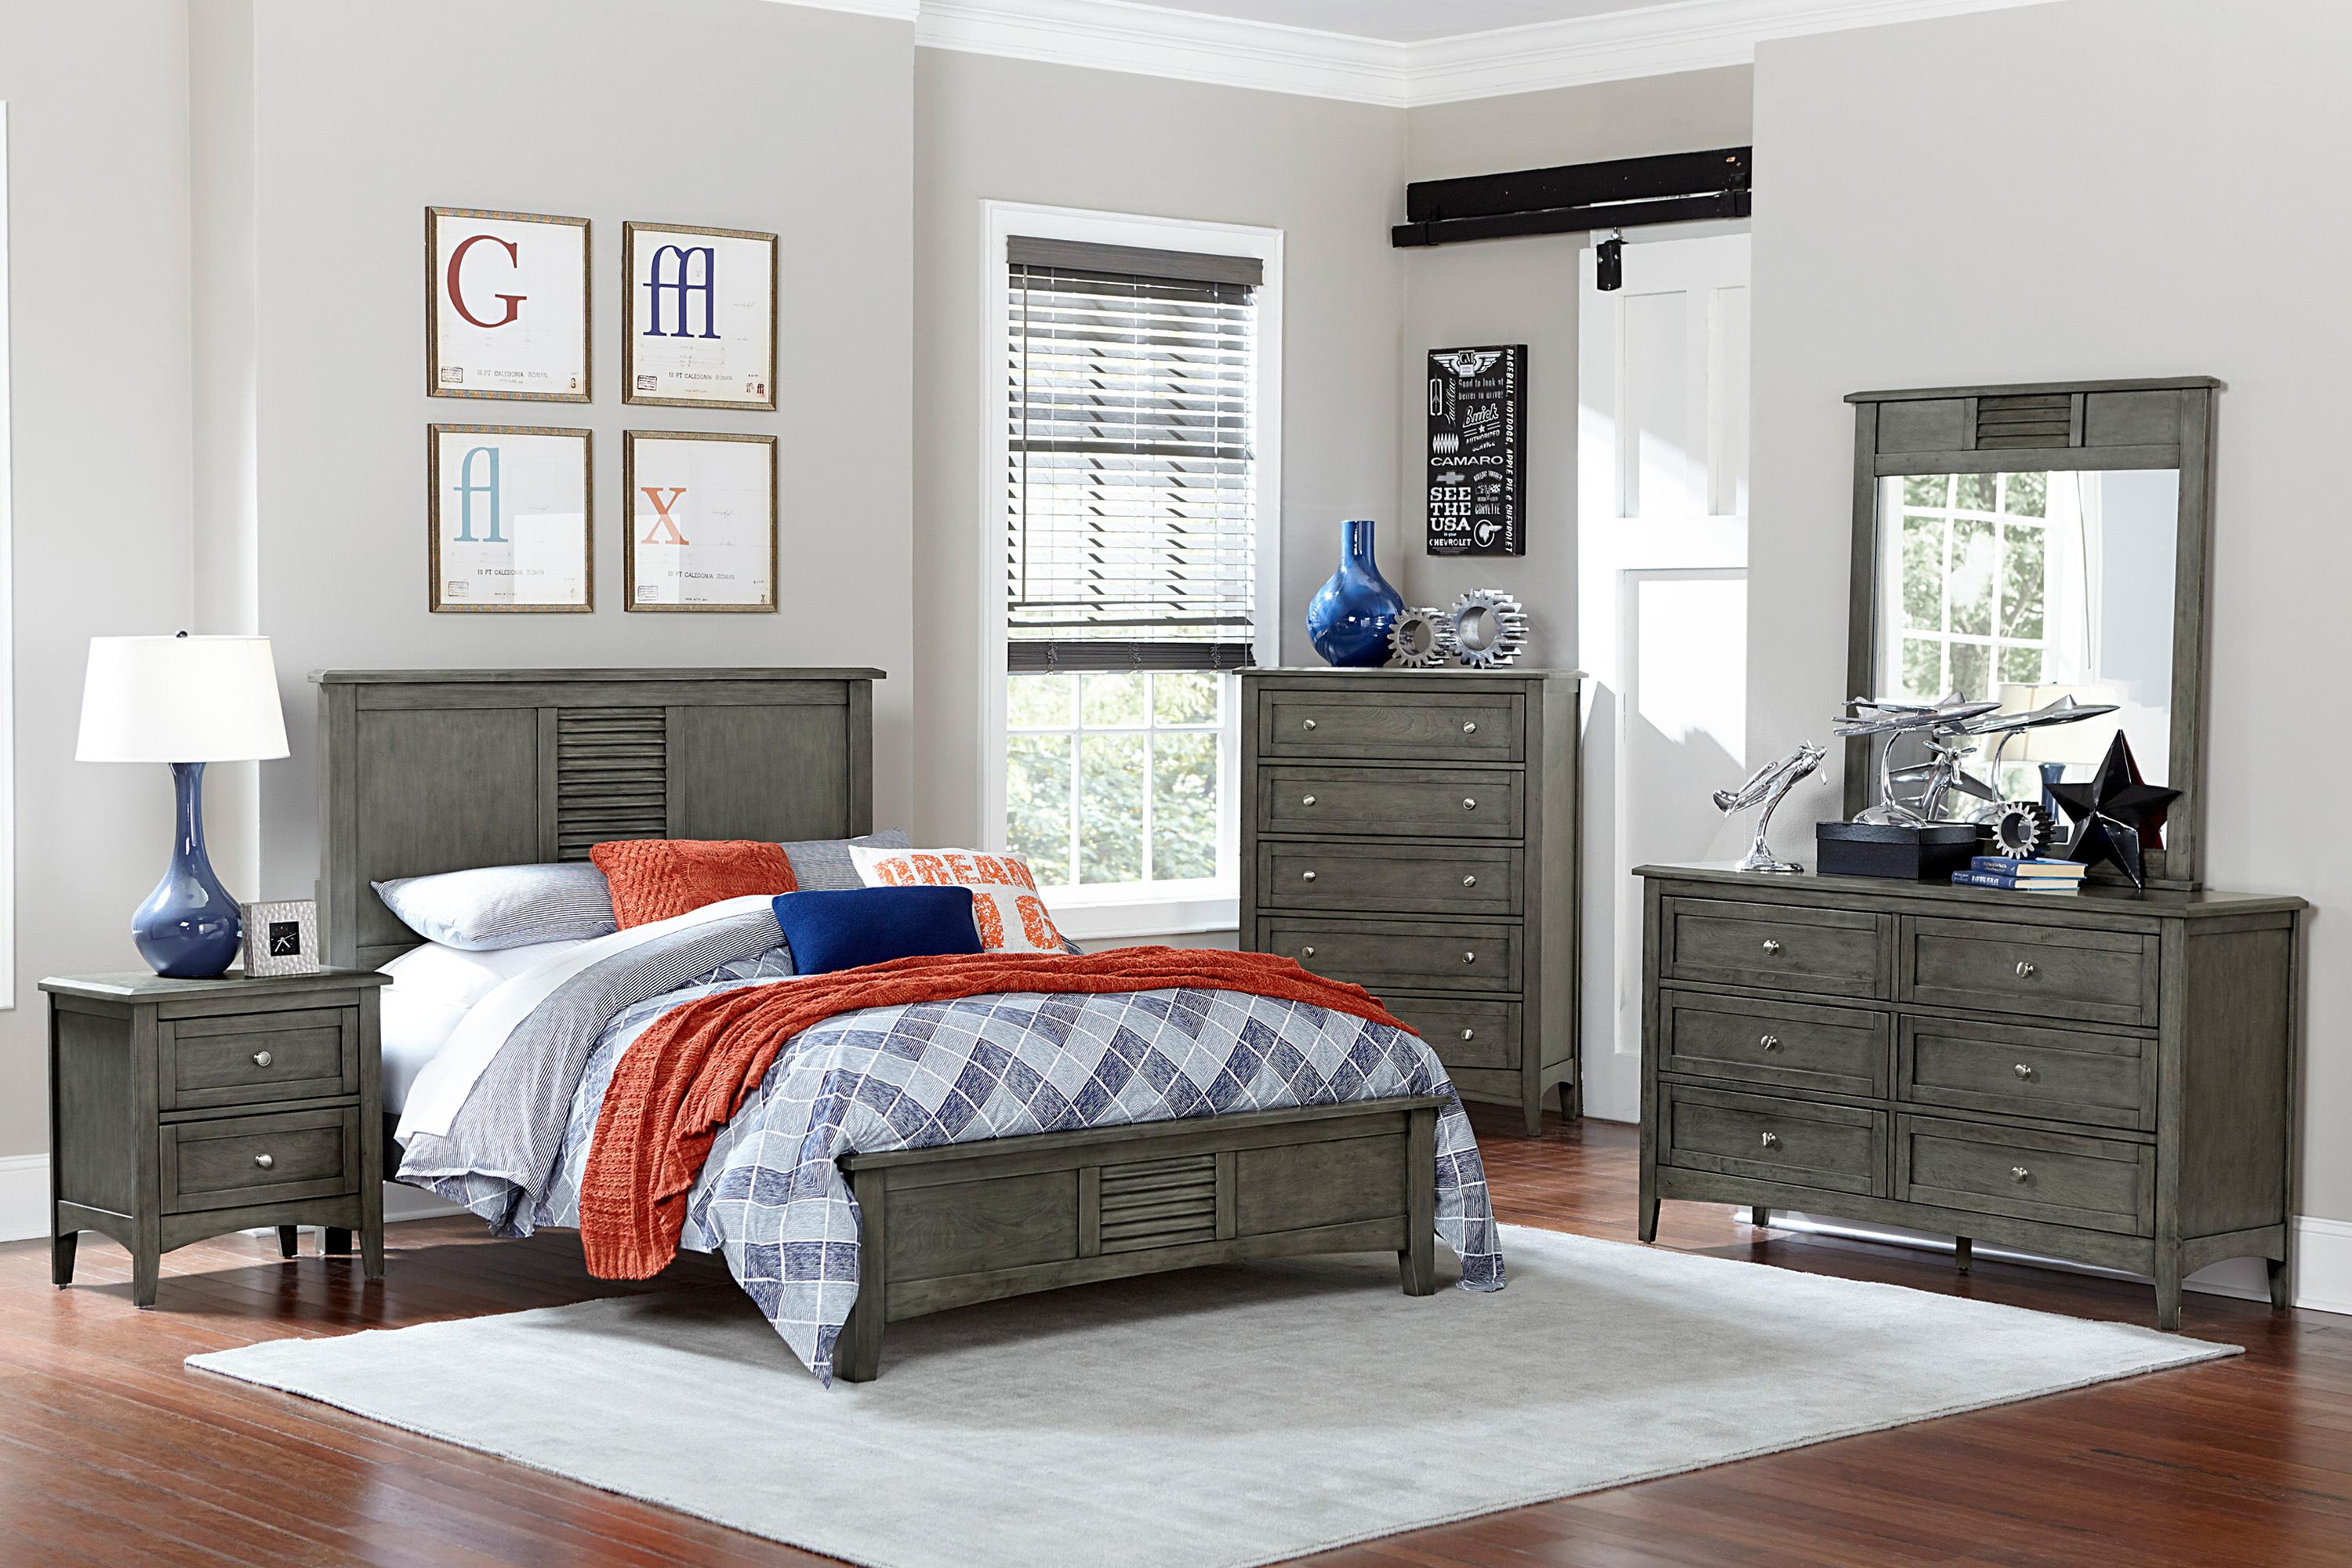 Transitional Bedroom Set 2046-1-5PC Garcia 2046-1-5PC in Gray 